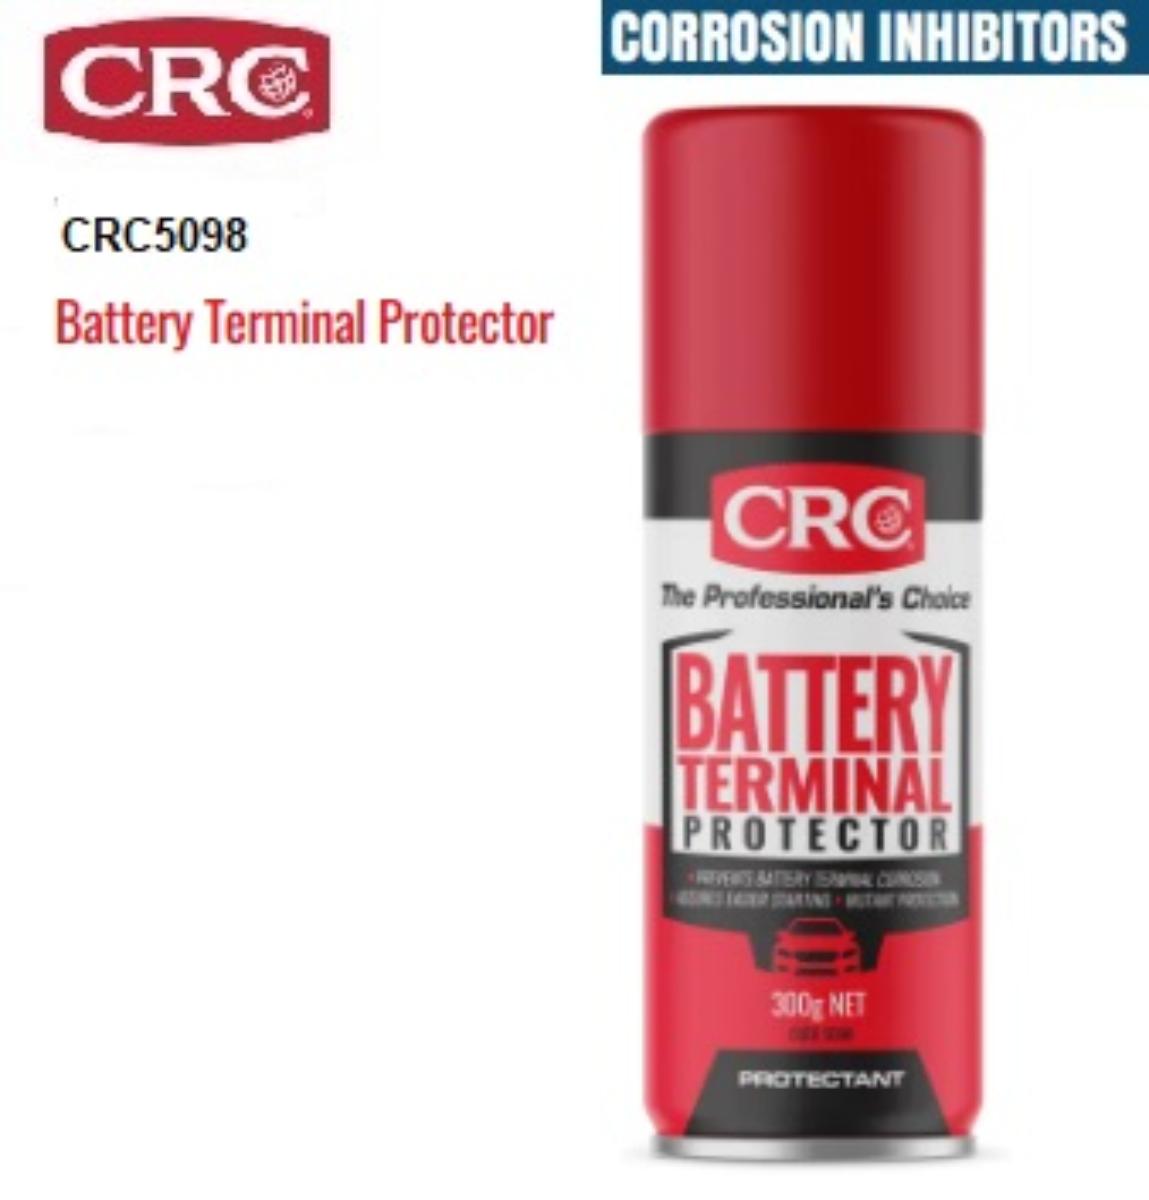 CRC BATTERY TERMINAL PROTECTOR 300g